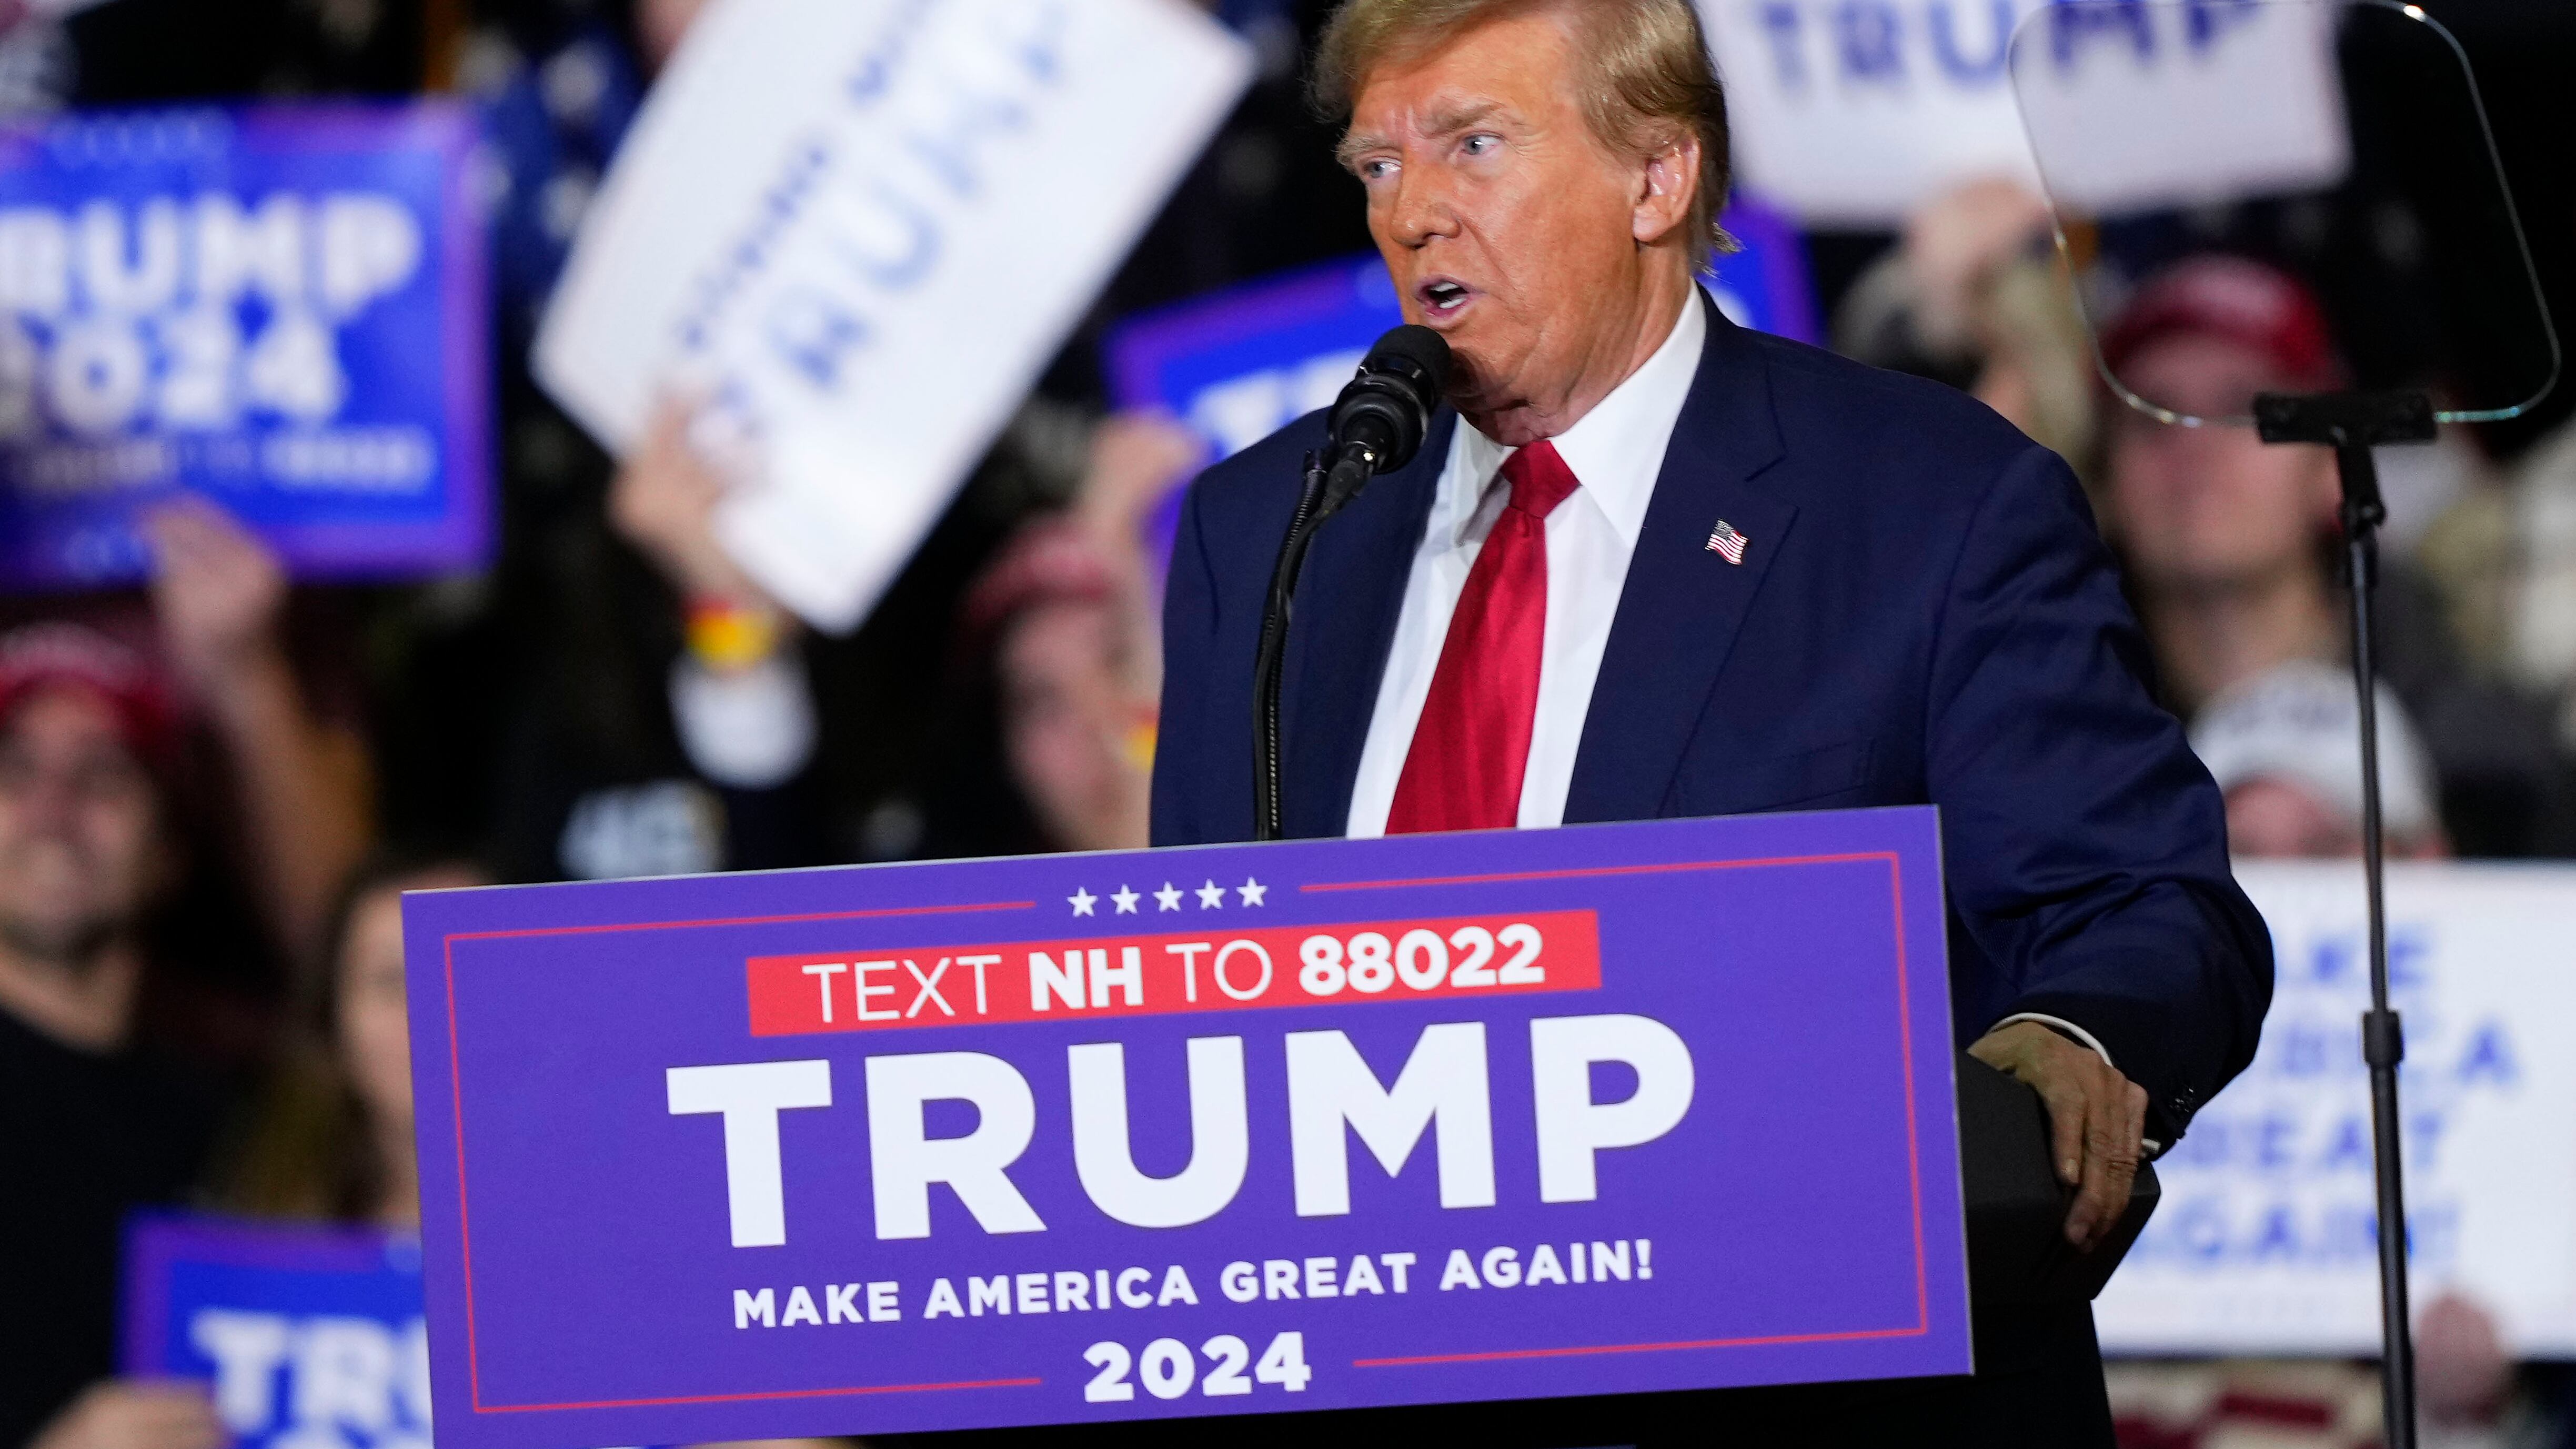 Former President Donald Trump speaks during a campaign event in Manchester, New Hampshire (Matt Rourke/AP)